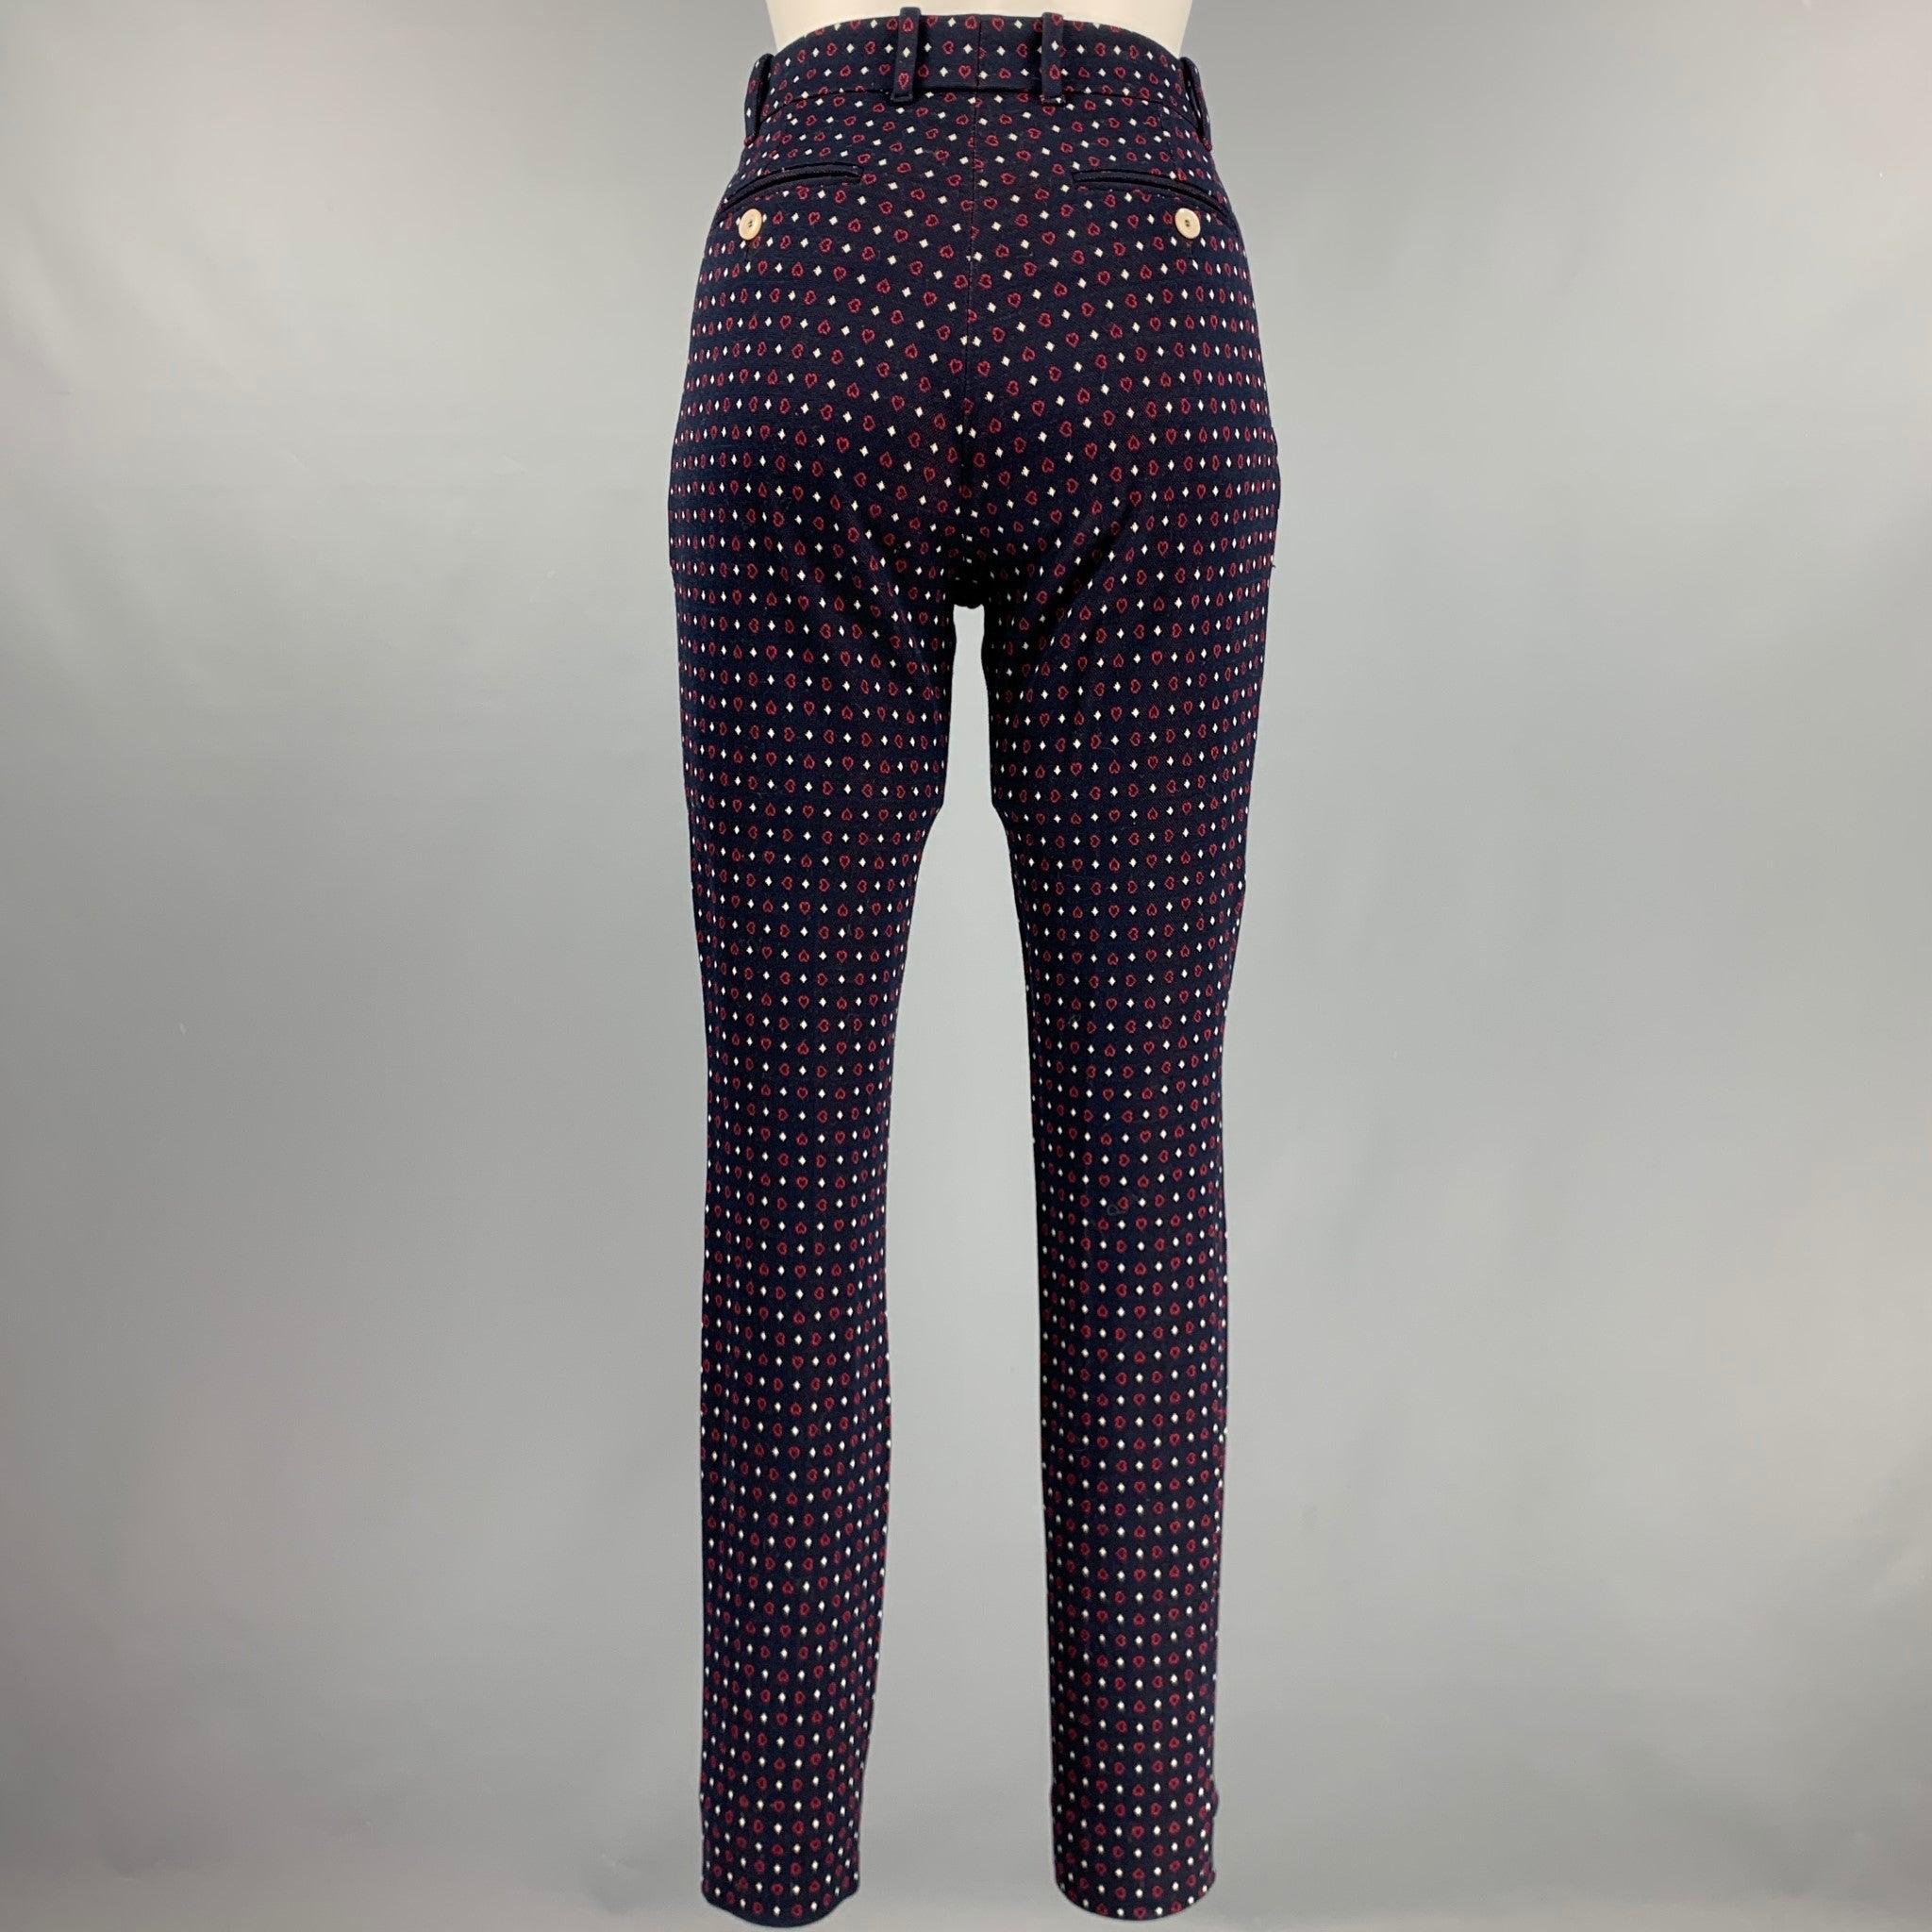 GUCCI casual pants
in a navy cotton fabric featuring red hearts and white diamonds pattern, a narrow leg style, and zip fly closure. Made in Italy.Excellent Pre-Owned Condition. 

Marked:   36 

Measurements: 
  Waist: 27 inches Rise: 8.5 inches